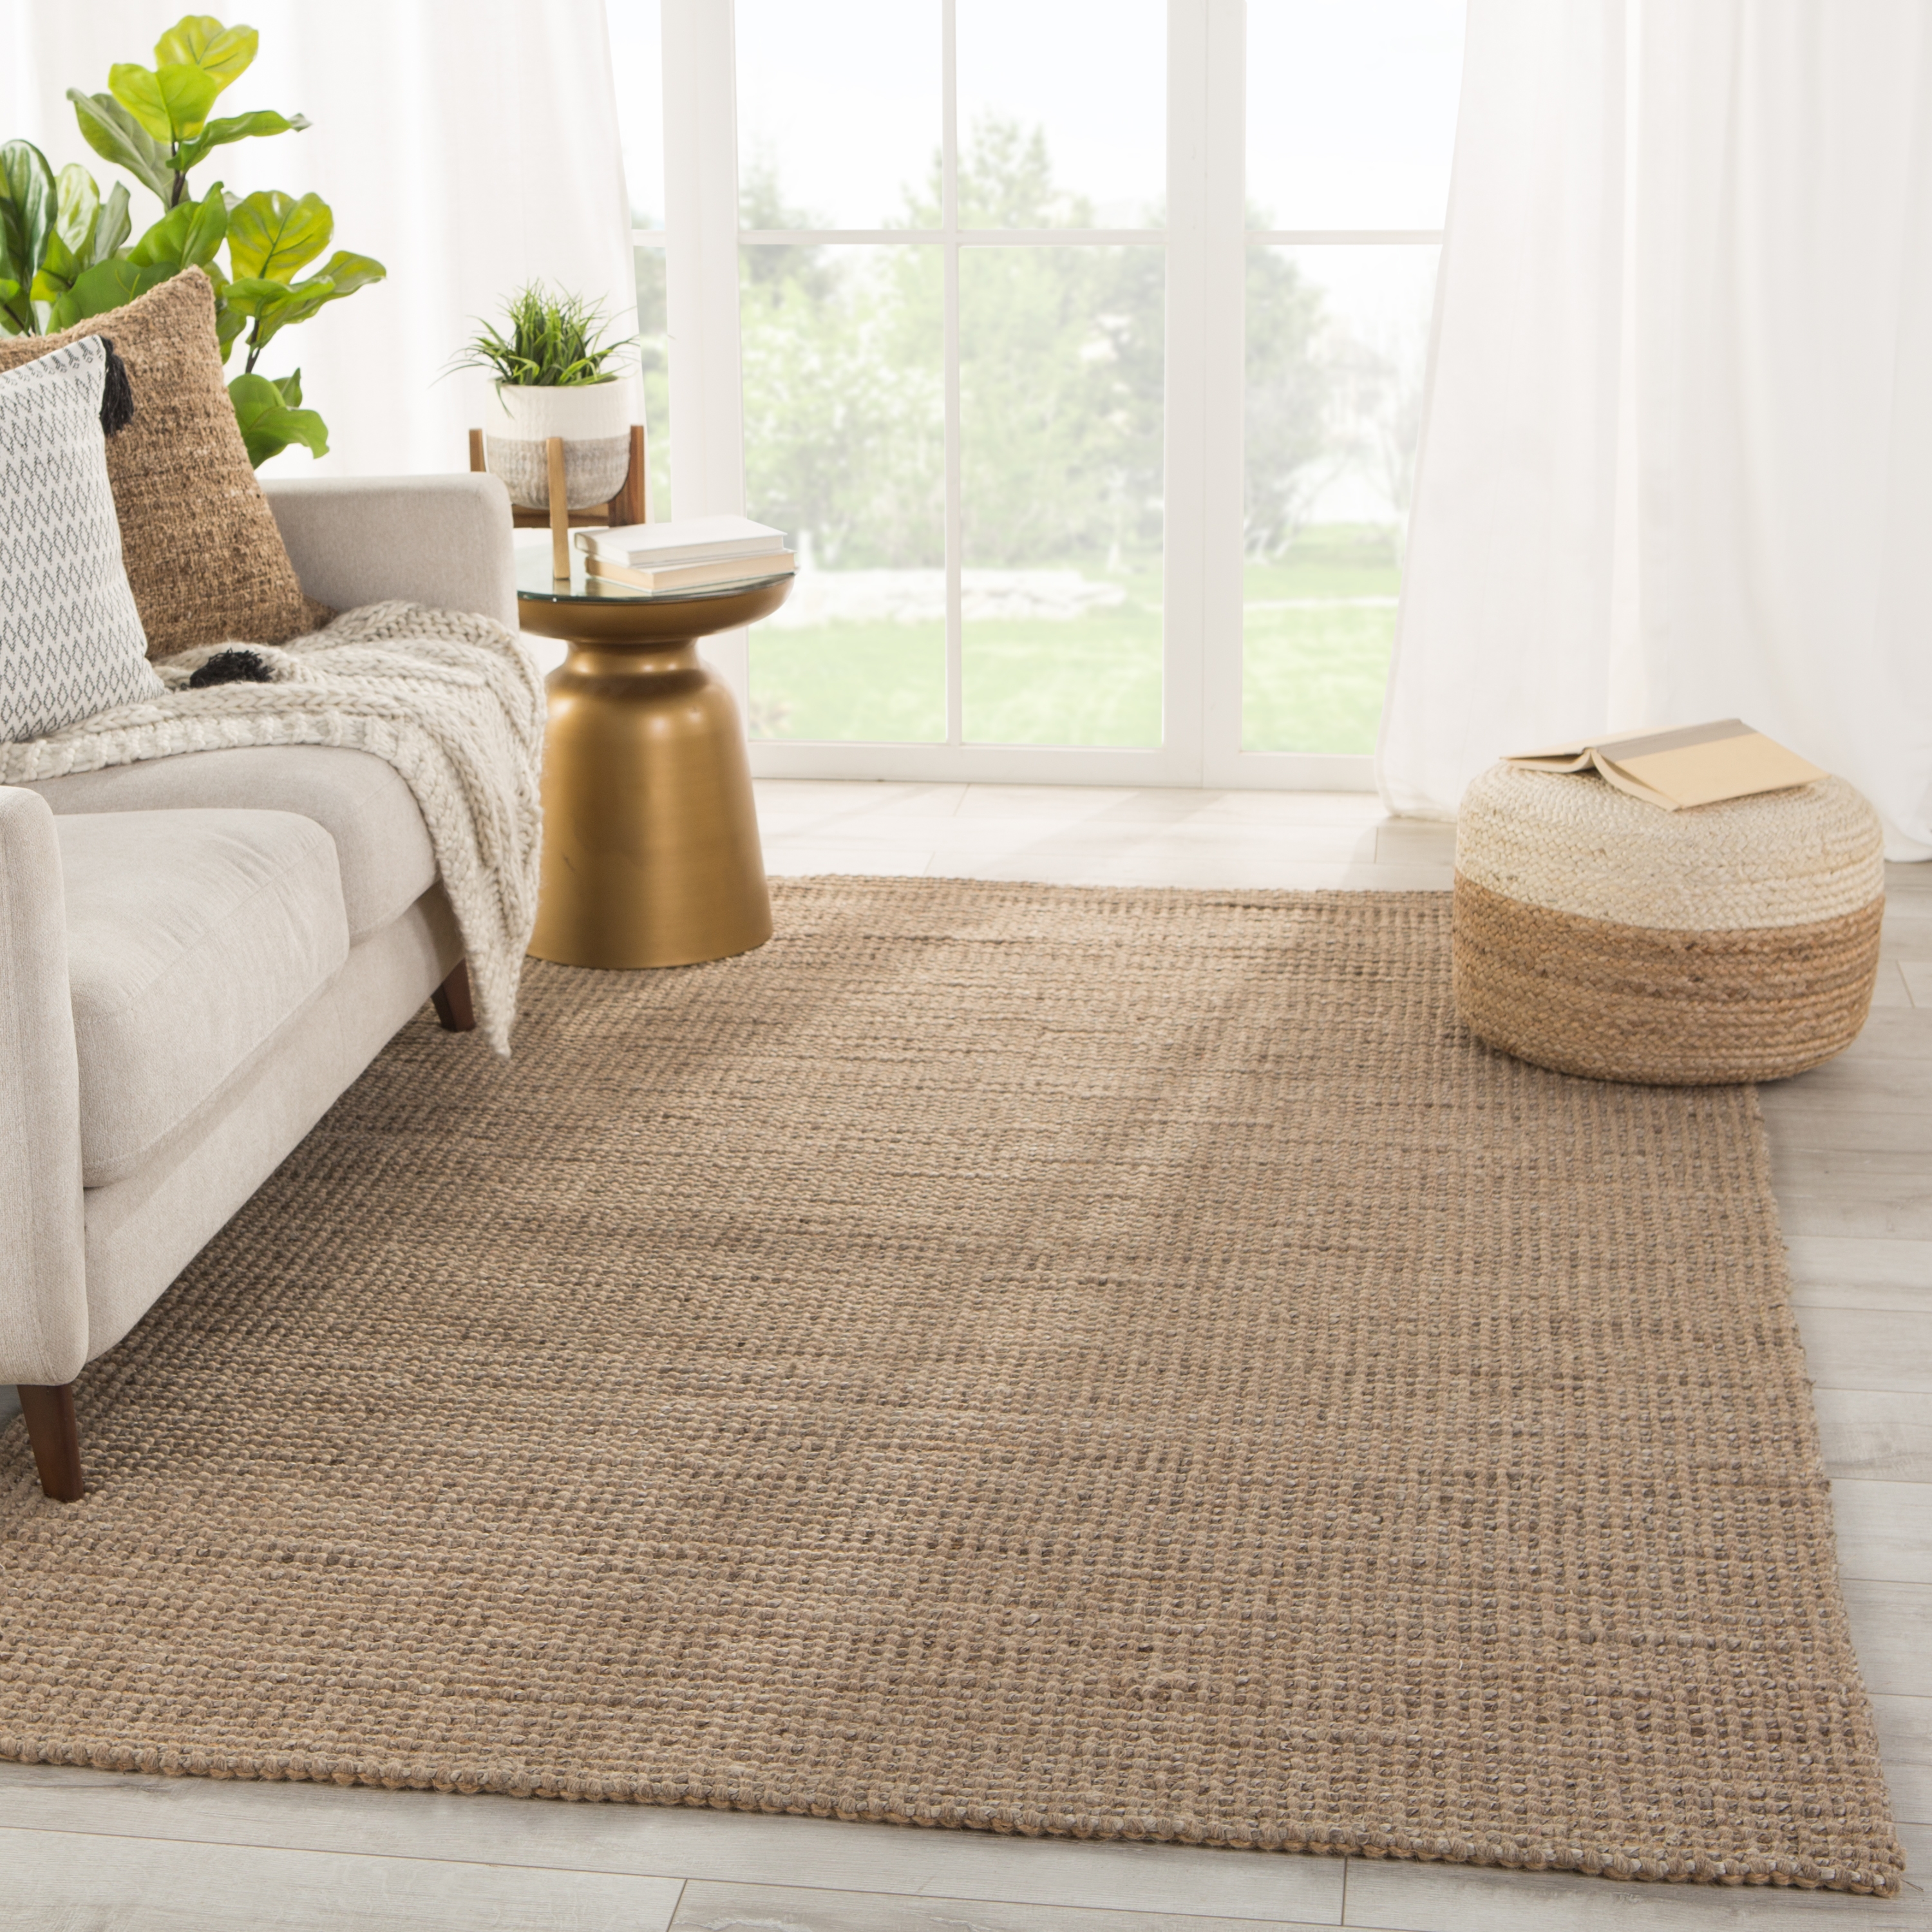 Beech Natural Solid Tan/ Taupe Area Rug (10'X14') - Image 4